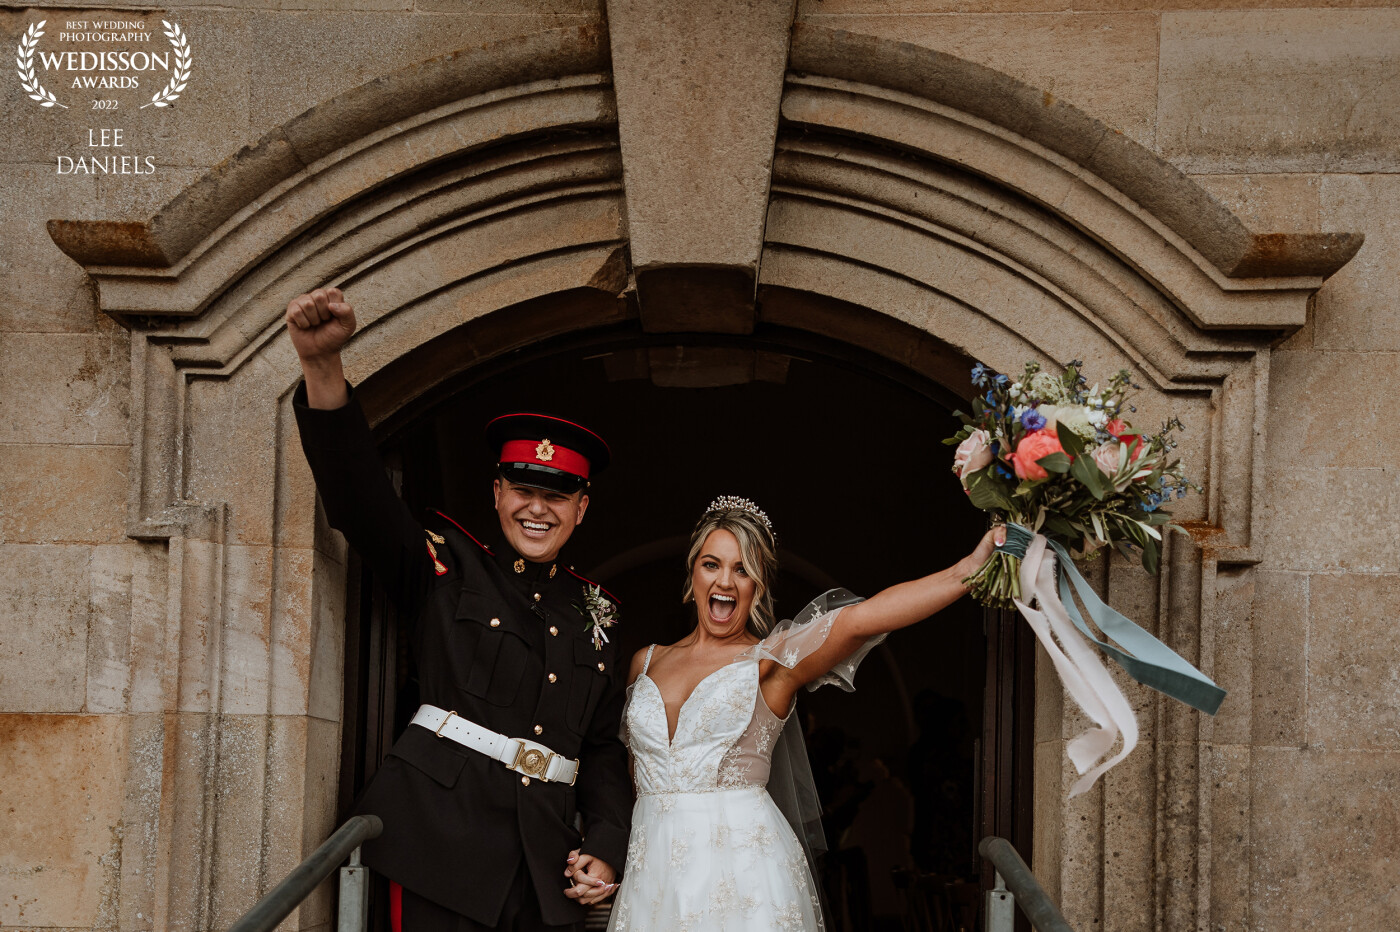 This pair had an infectious personalities, the joy in their faces really shone through in their images. This is the fresh married feeling exiting the church